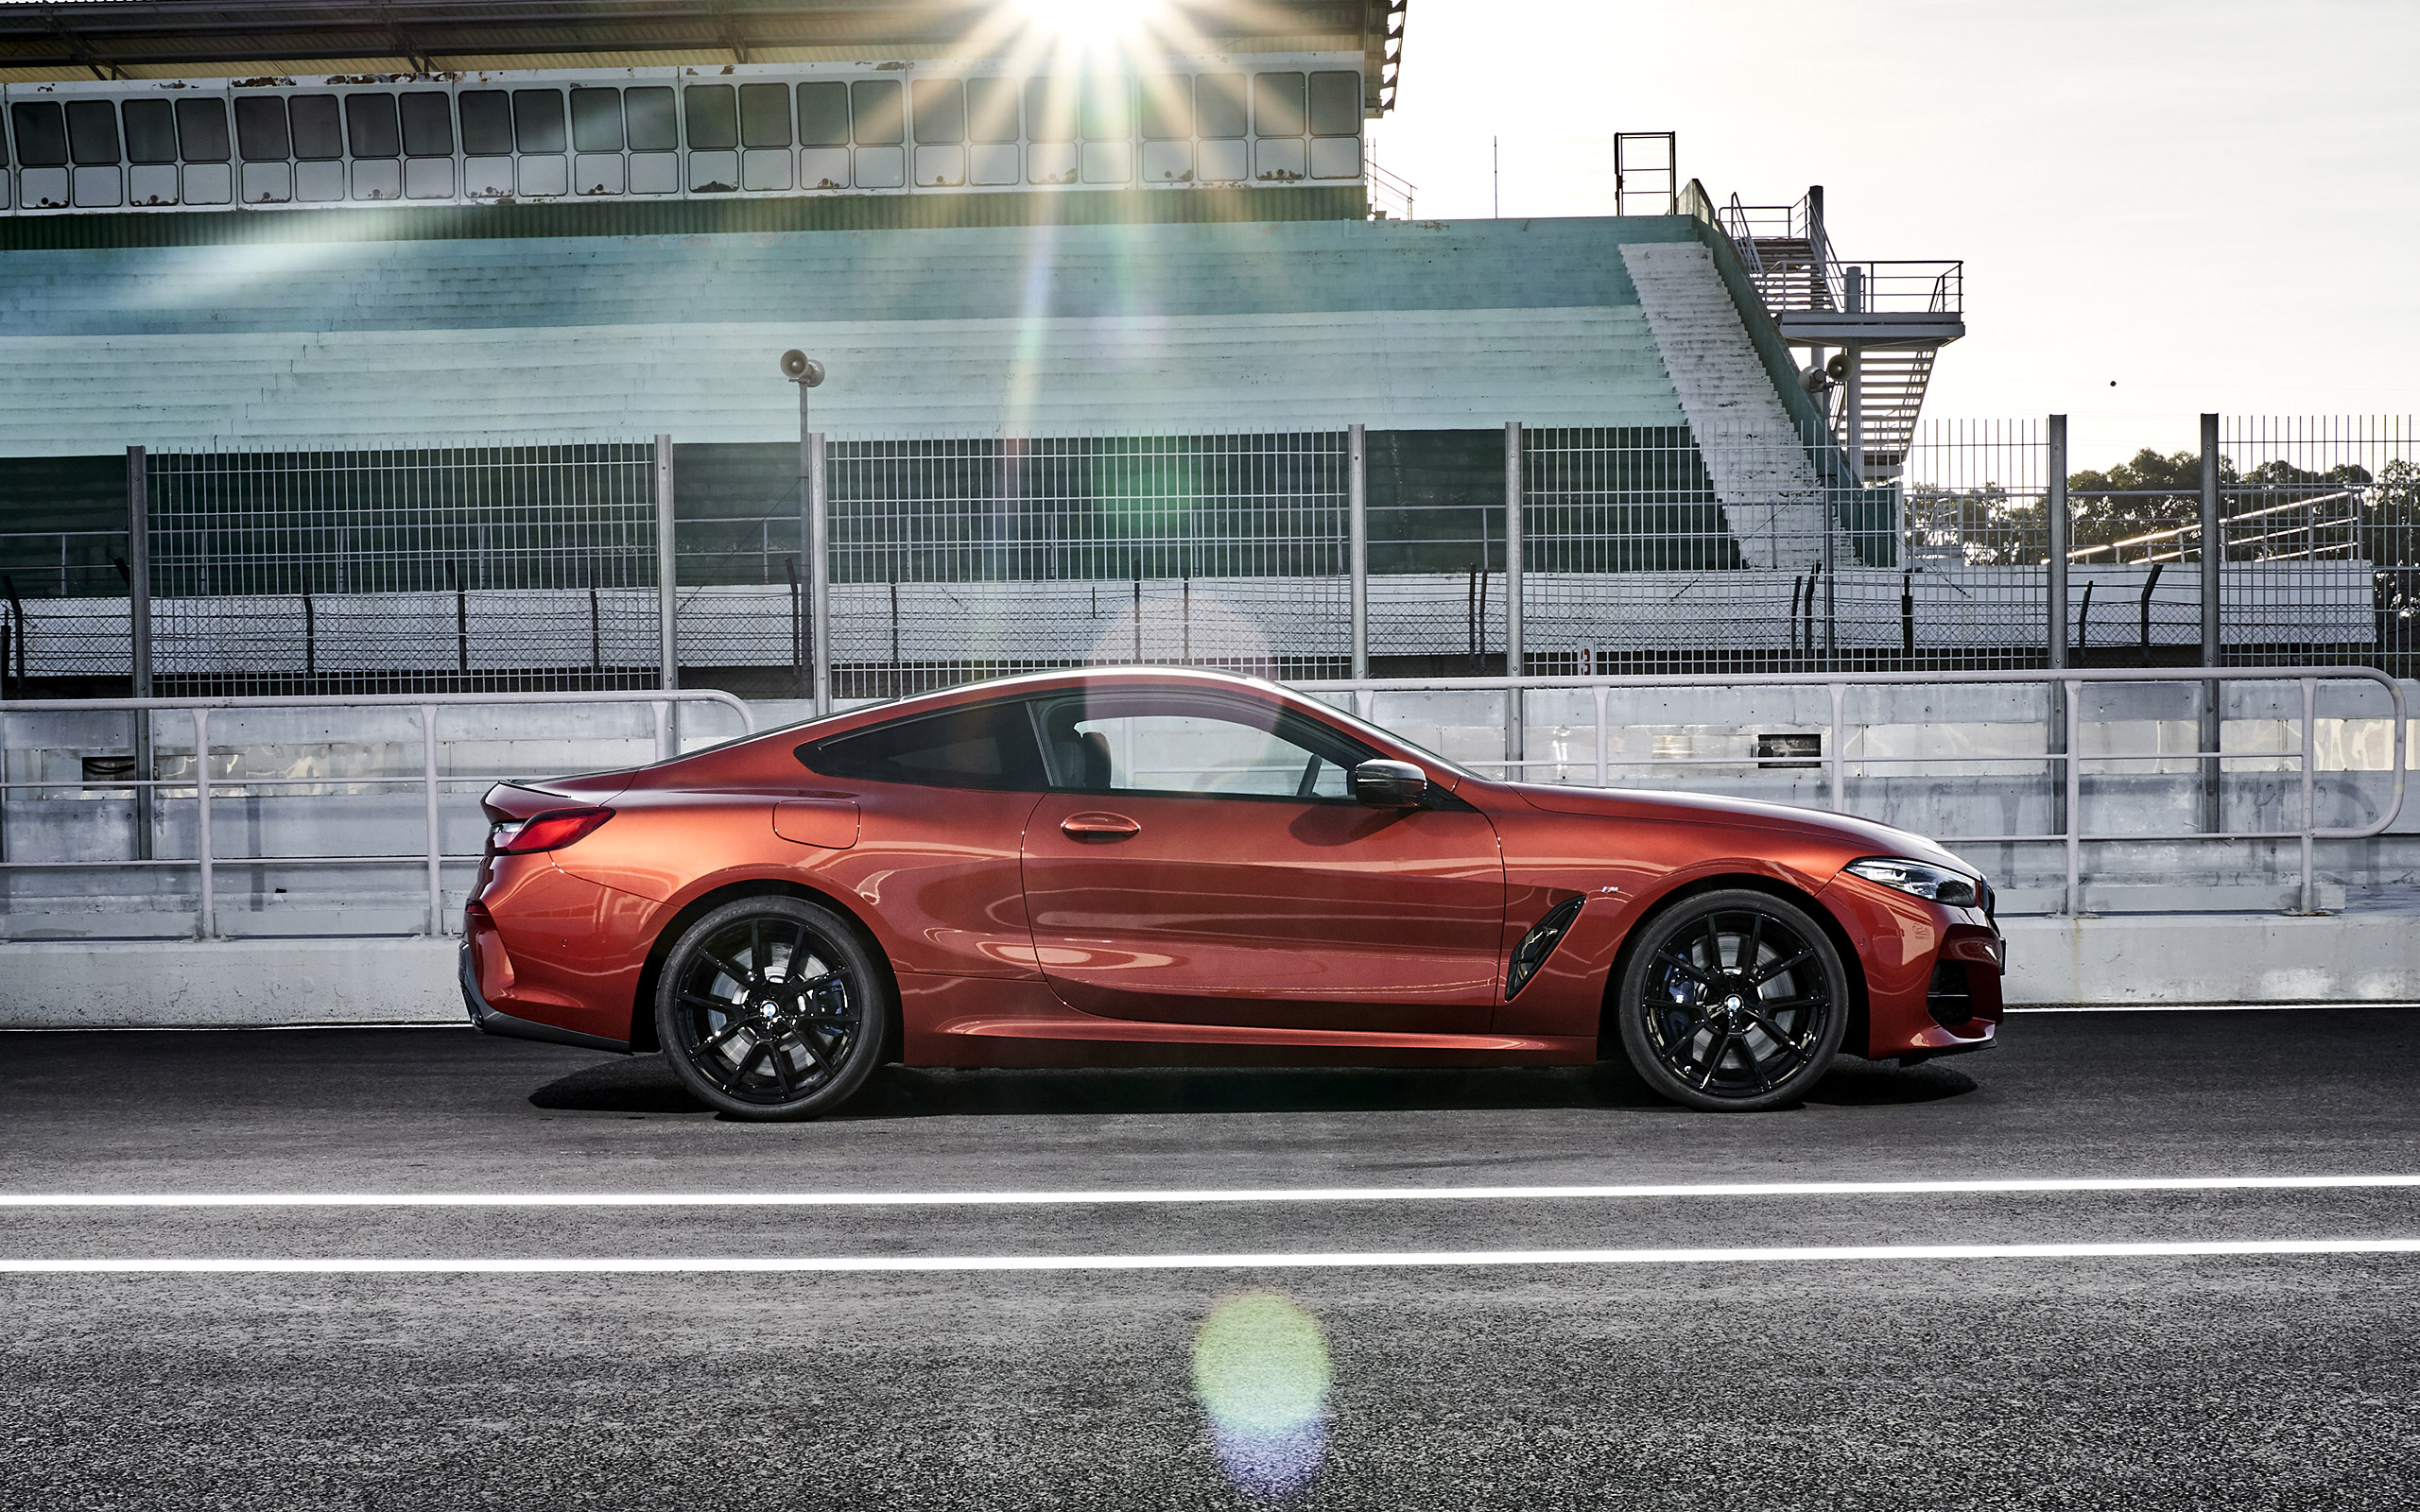  2019 BMW 8-Series Coupe Wallpaper.